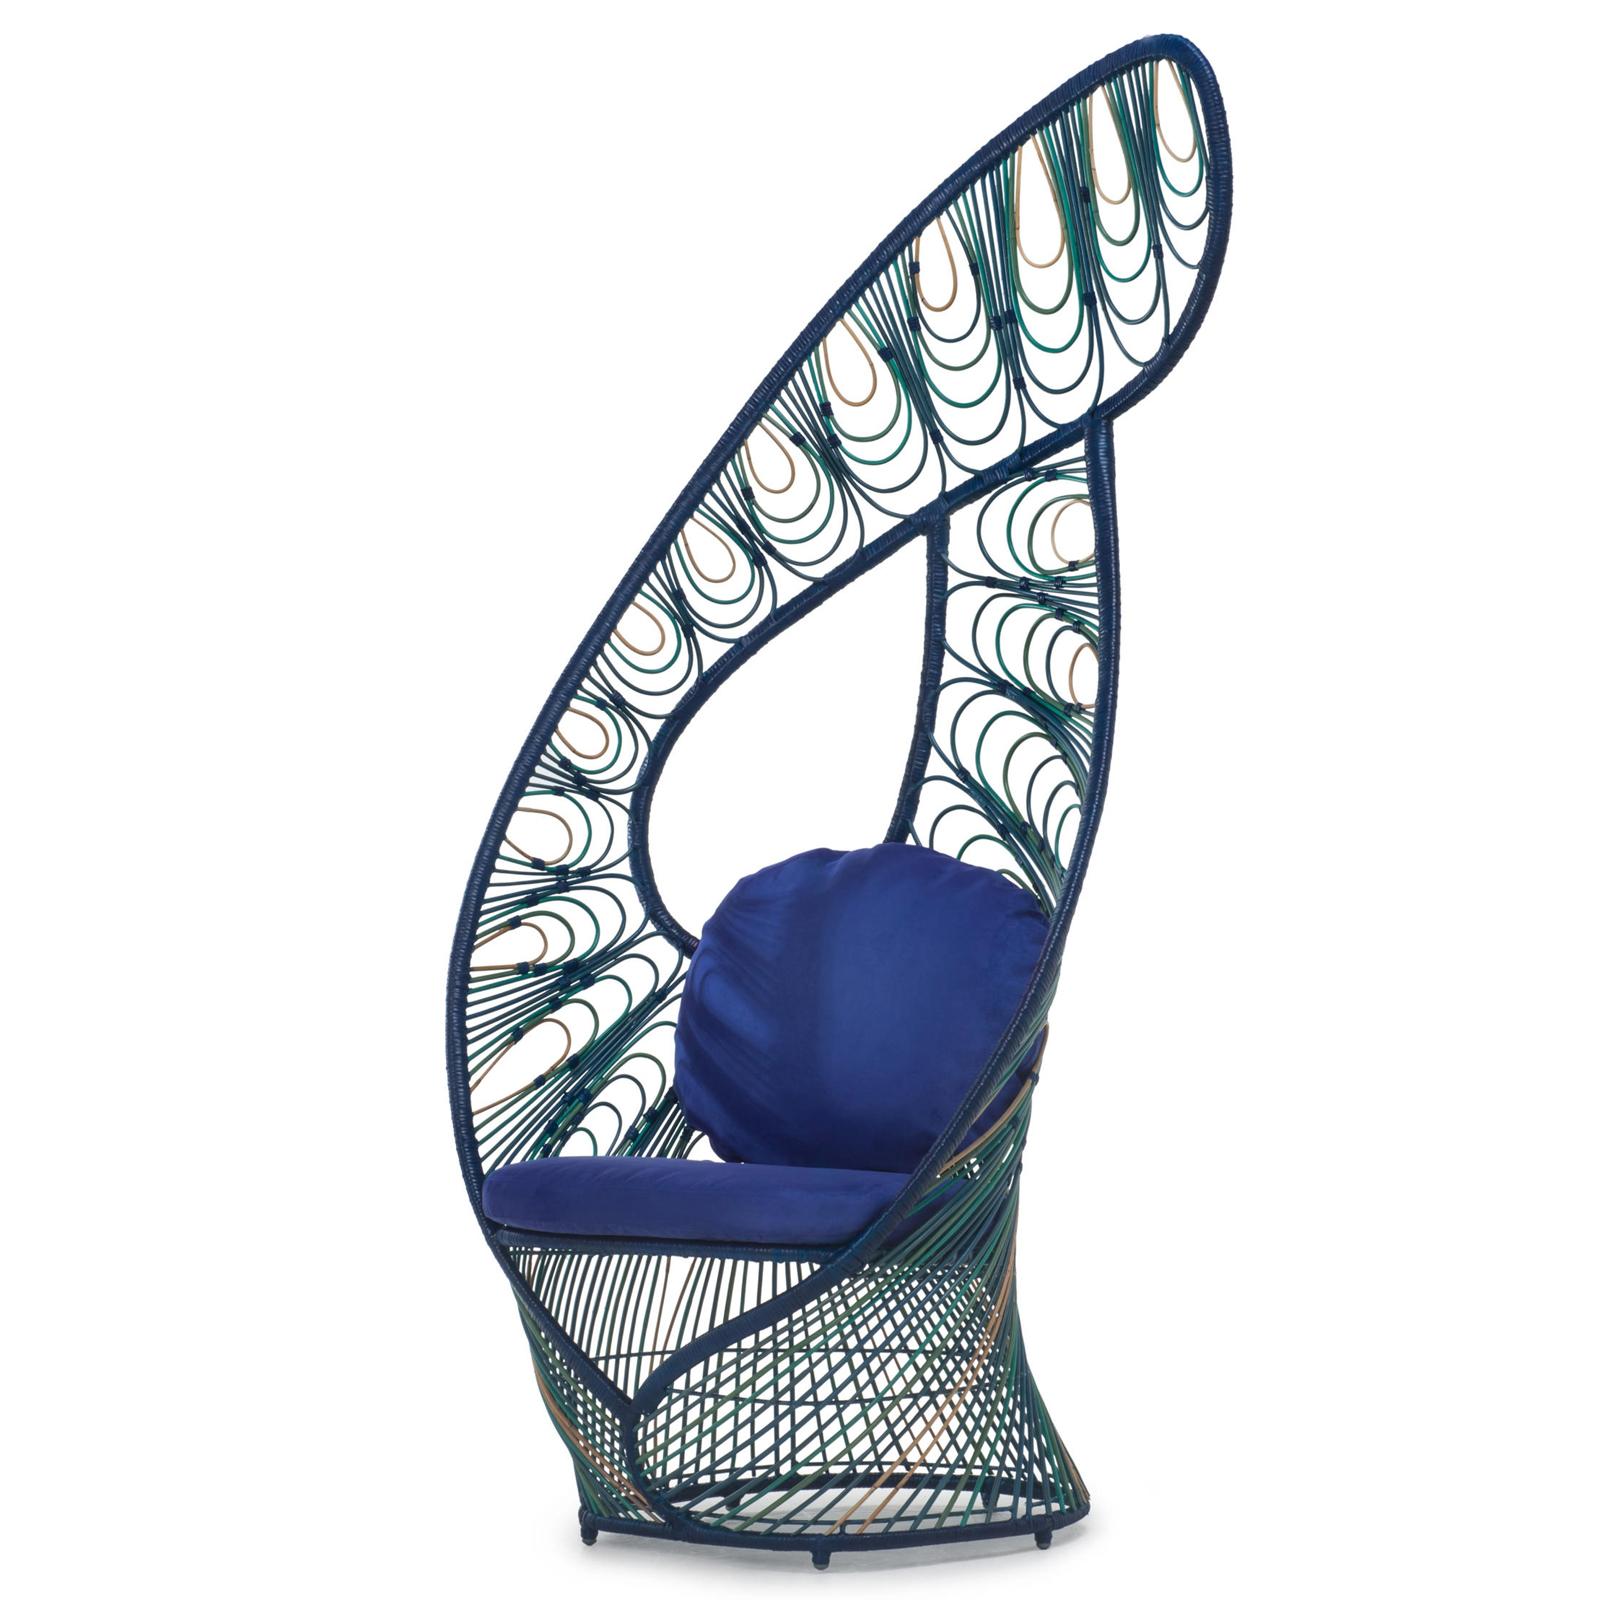 Chair Birdy made in natural rattan in 
blue finish. With back and seat cushions
included.
Also available in natural rattan finish.
Lead time production if on stock 2-3 weeks,
if not on stock 15-16 weeks.